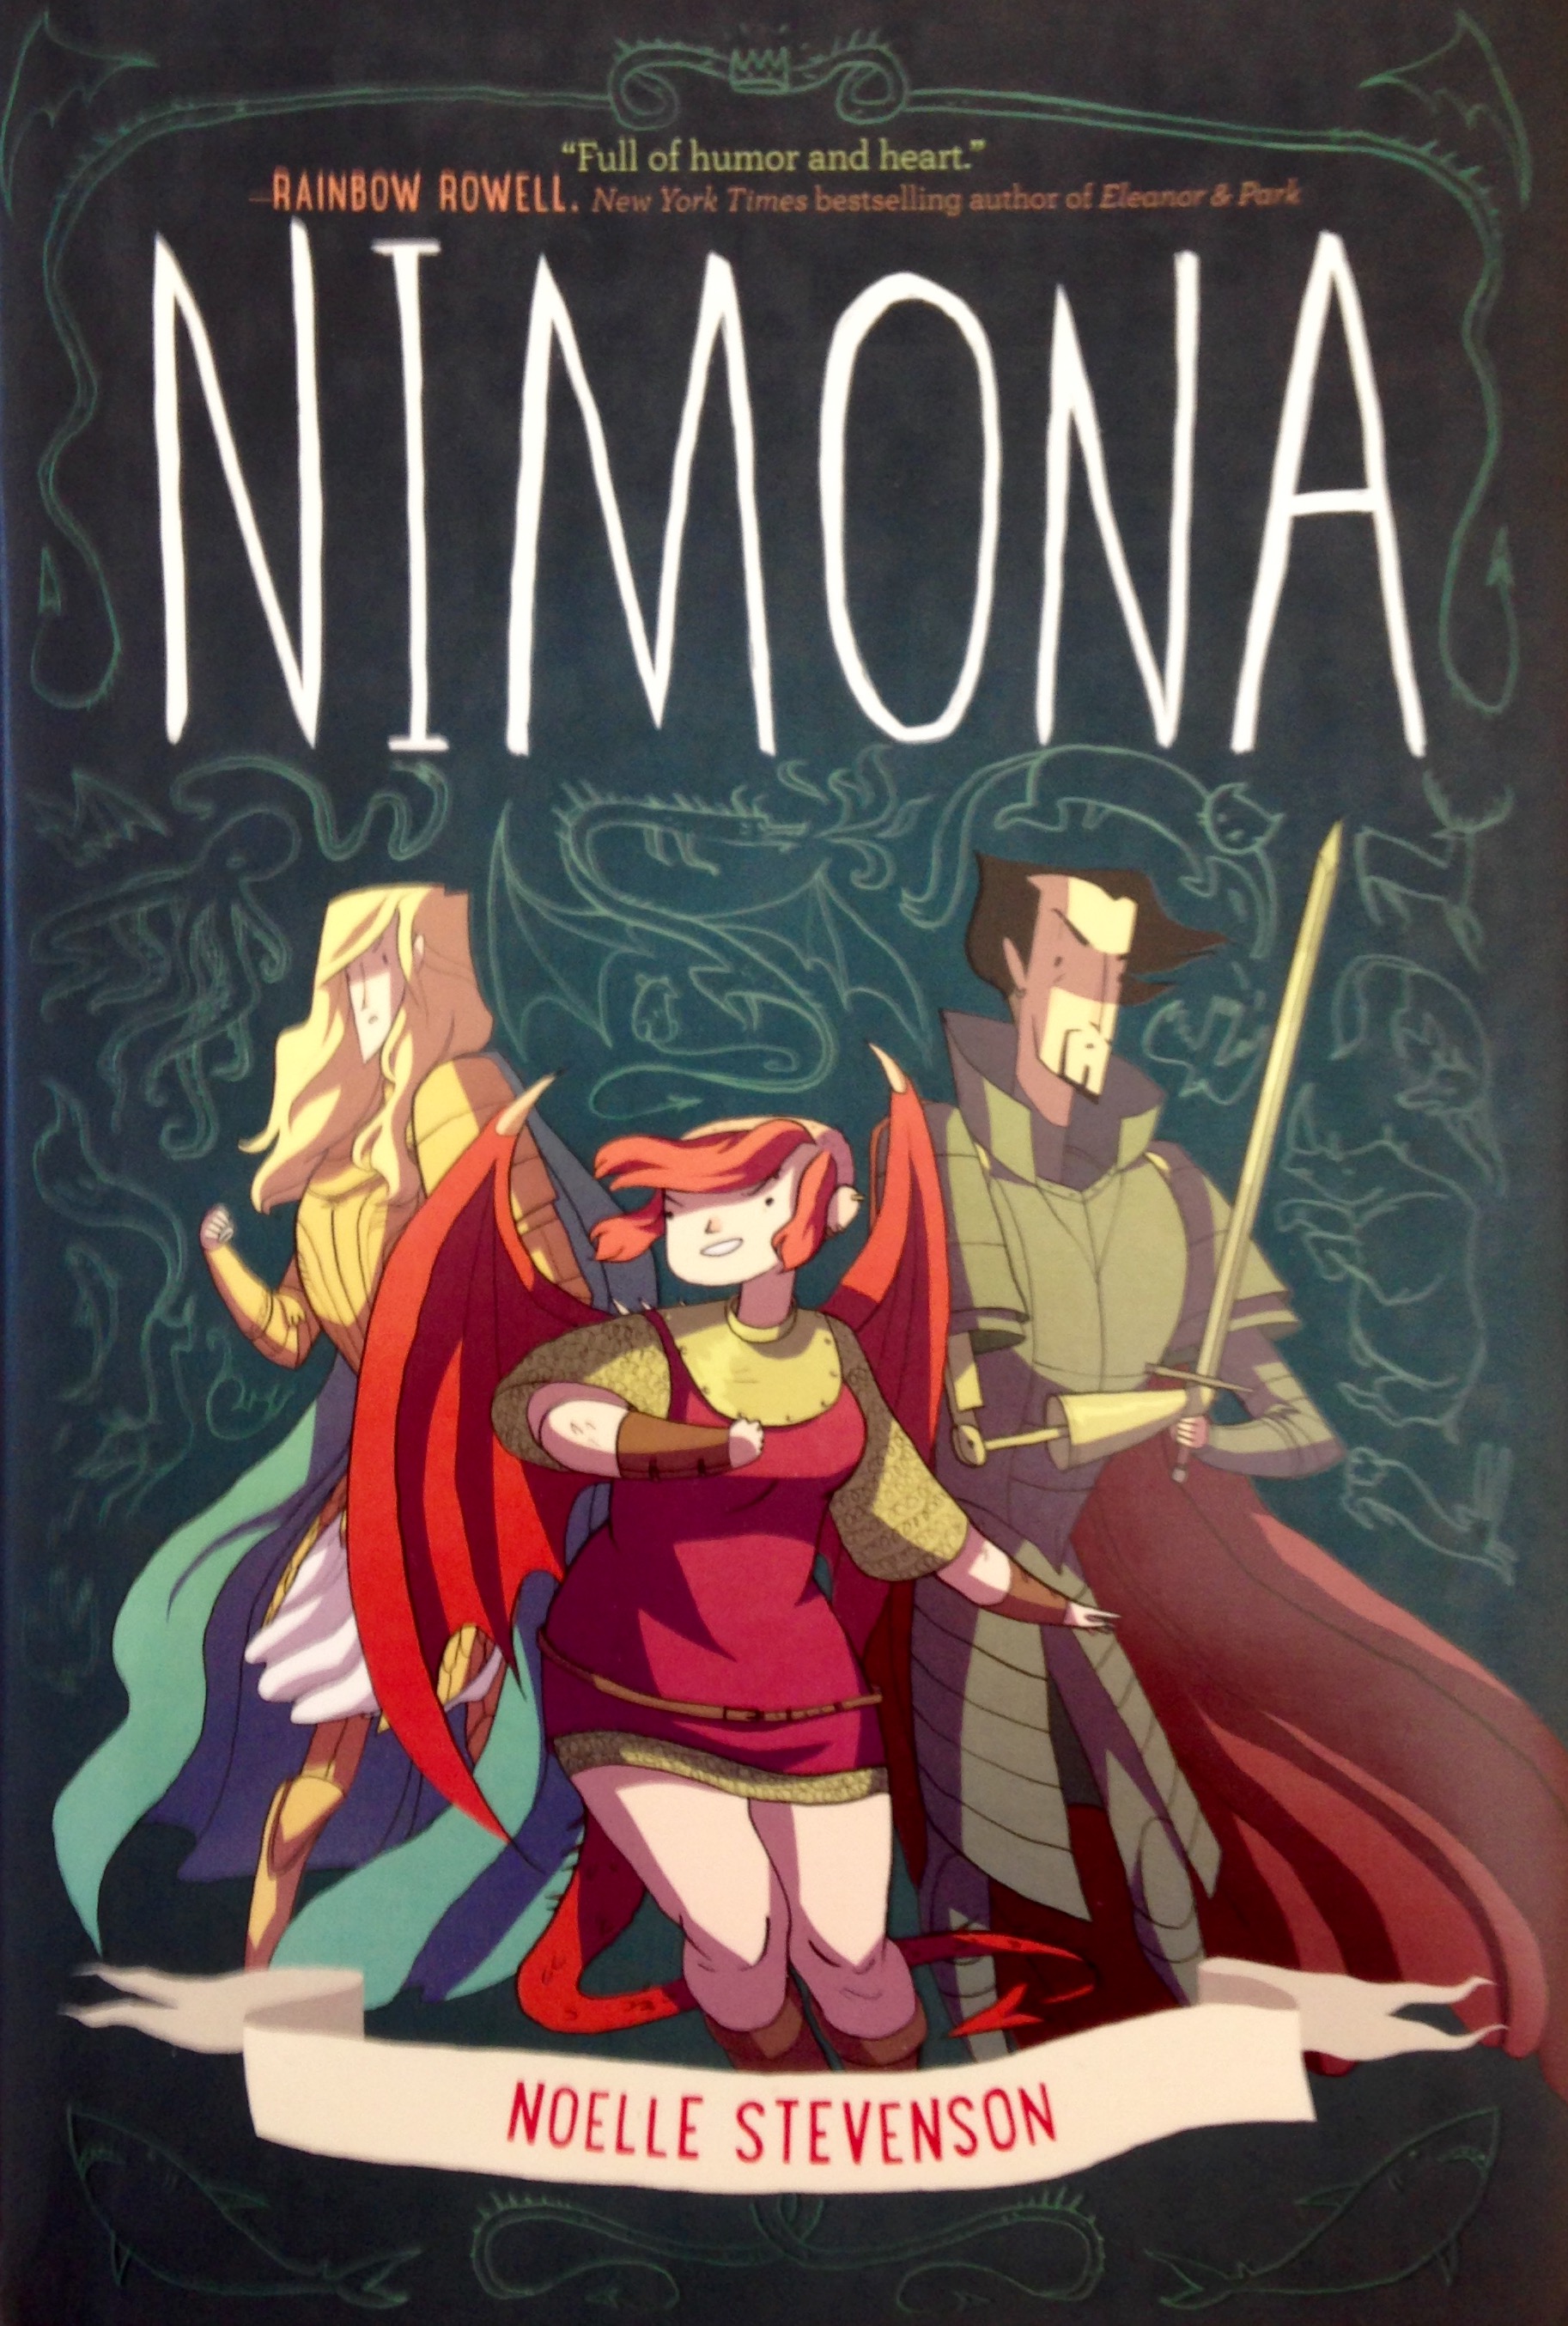 Image of book cover for Nimona